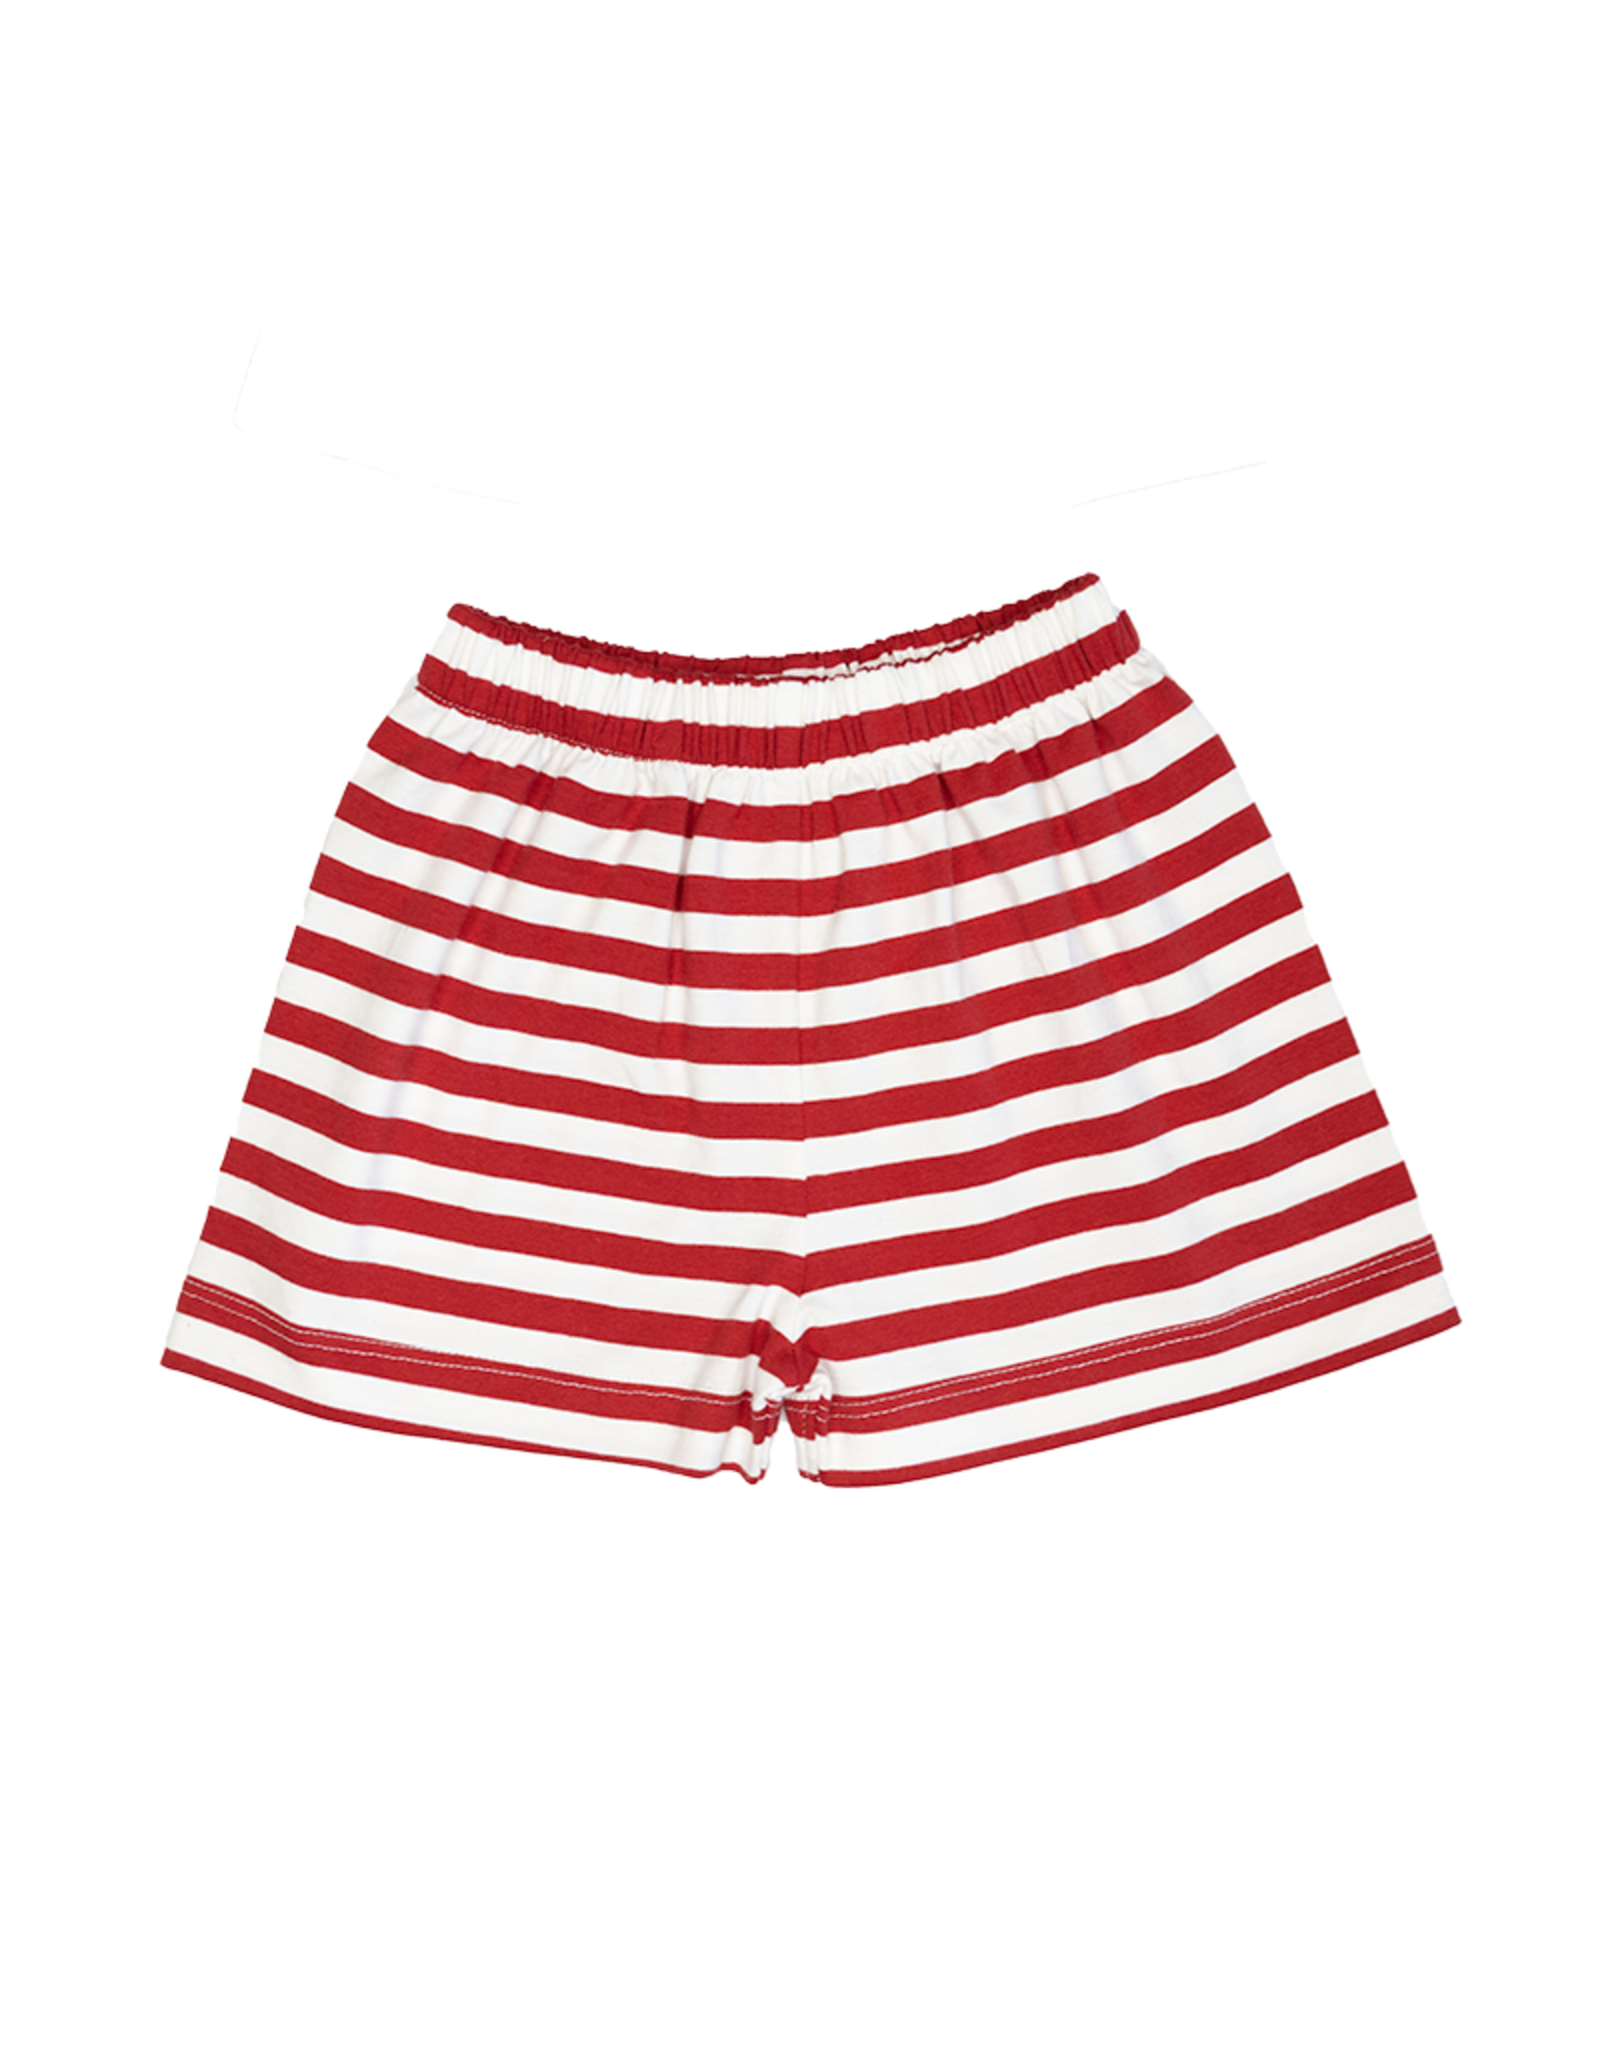 Three Sisters 742 Red Stripe Knit Short